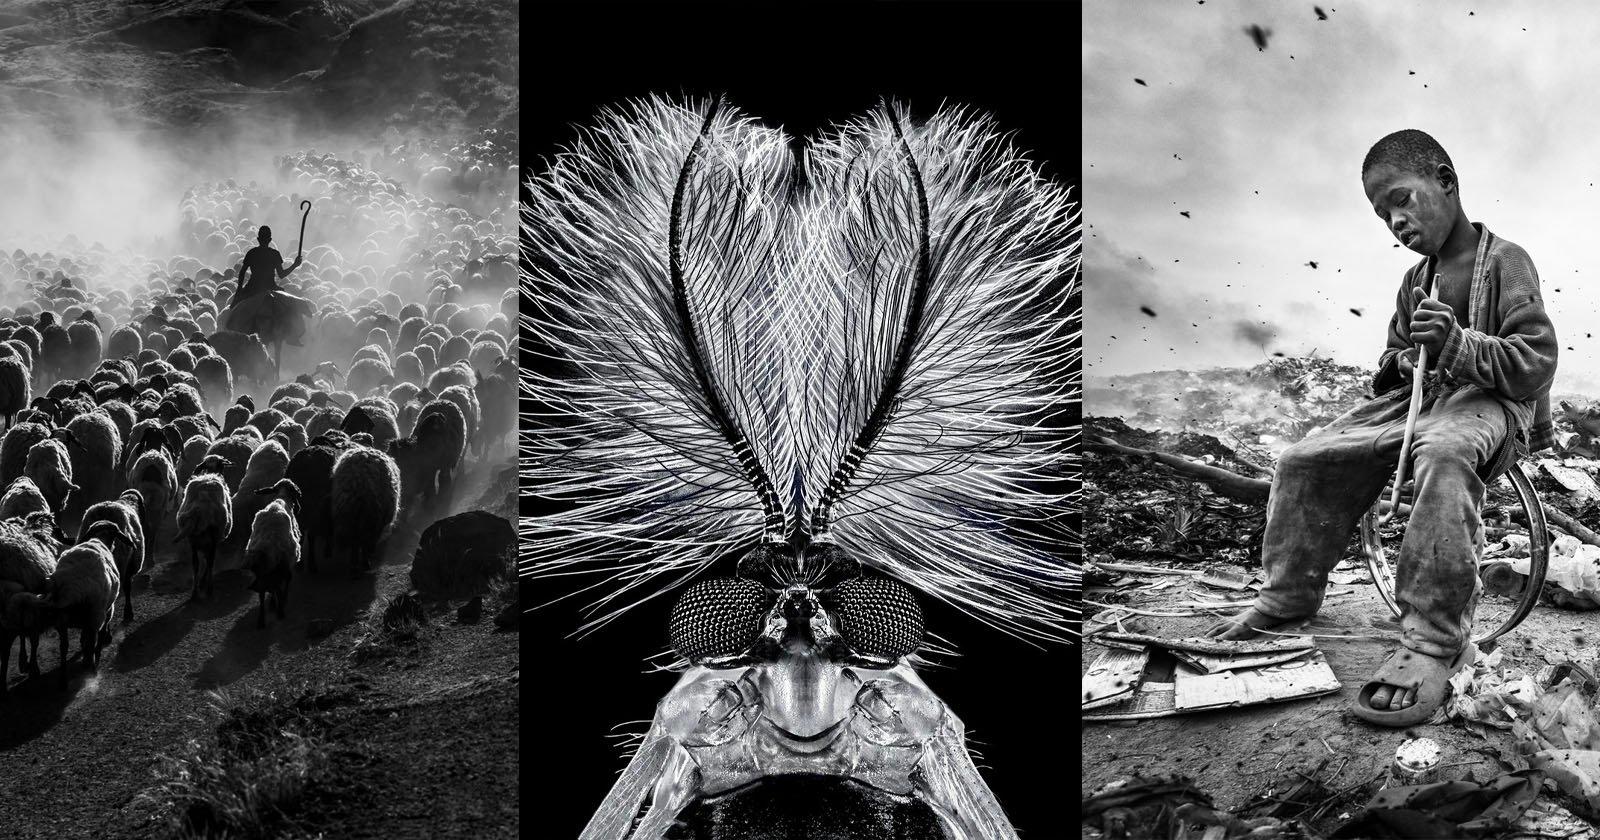  incredible winning black white photo competition 